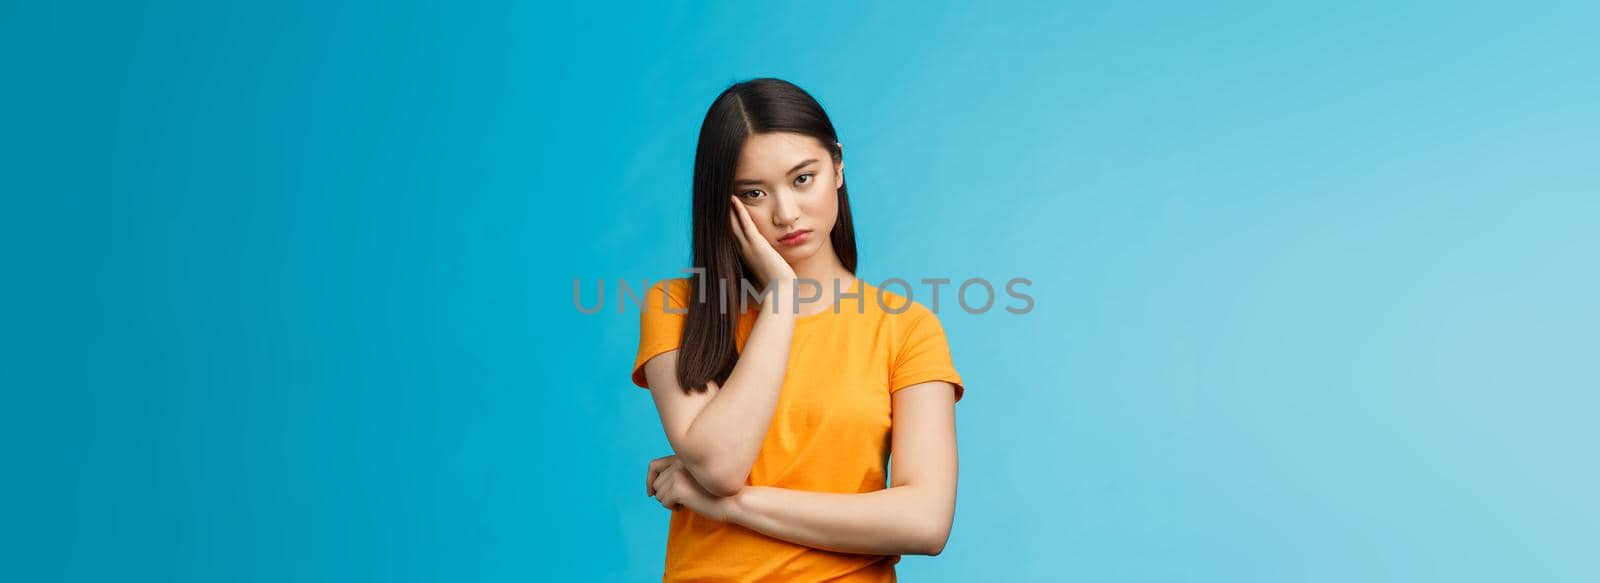 Sad bored asian female student attend boring uninteresting lecture lean face palm, look indifferent express apathy dislike, grimacing and sulking disappointed stand blue background bothered by Benzoix